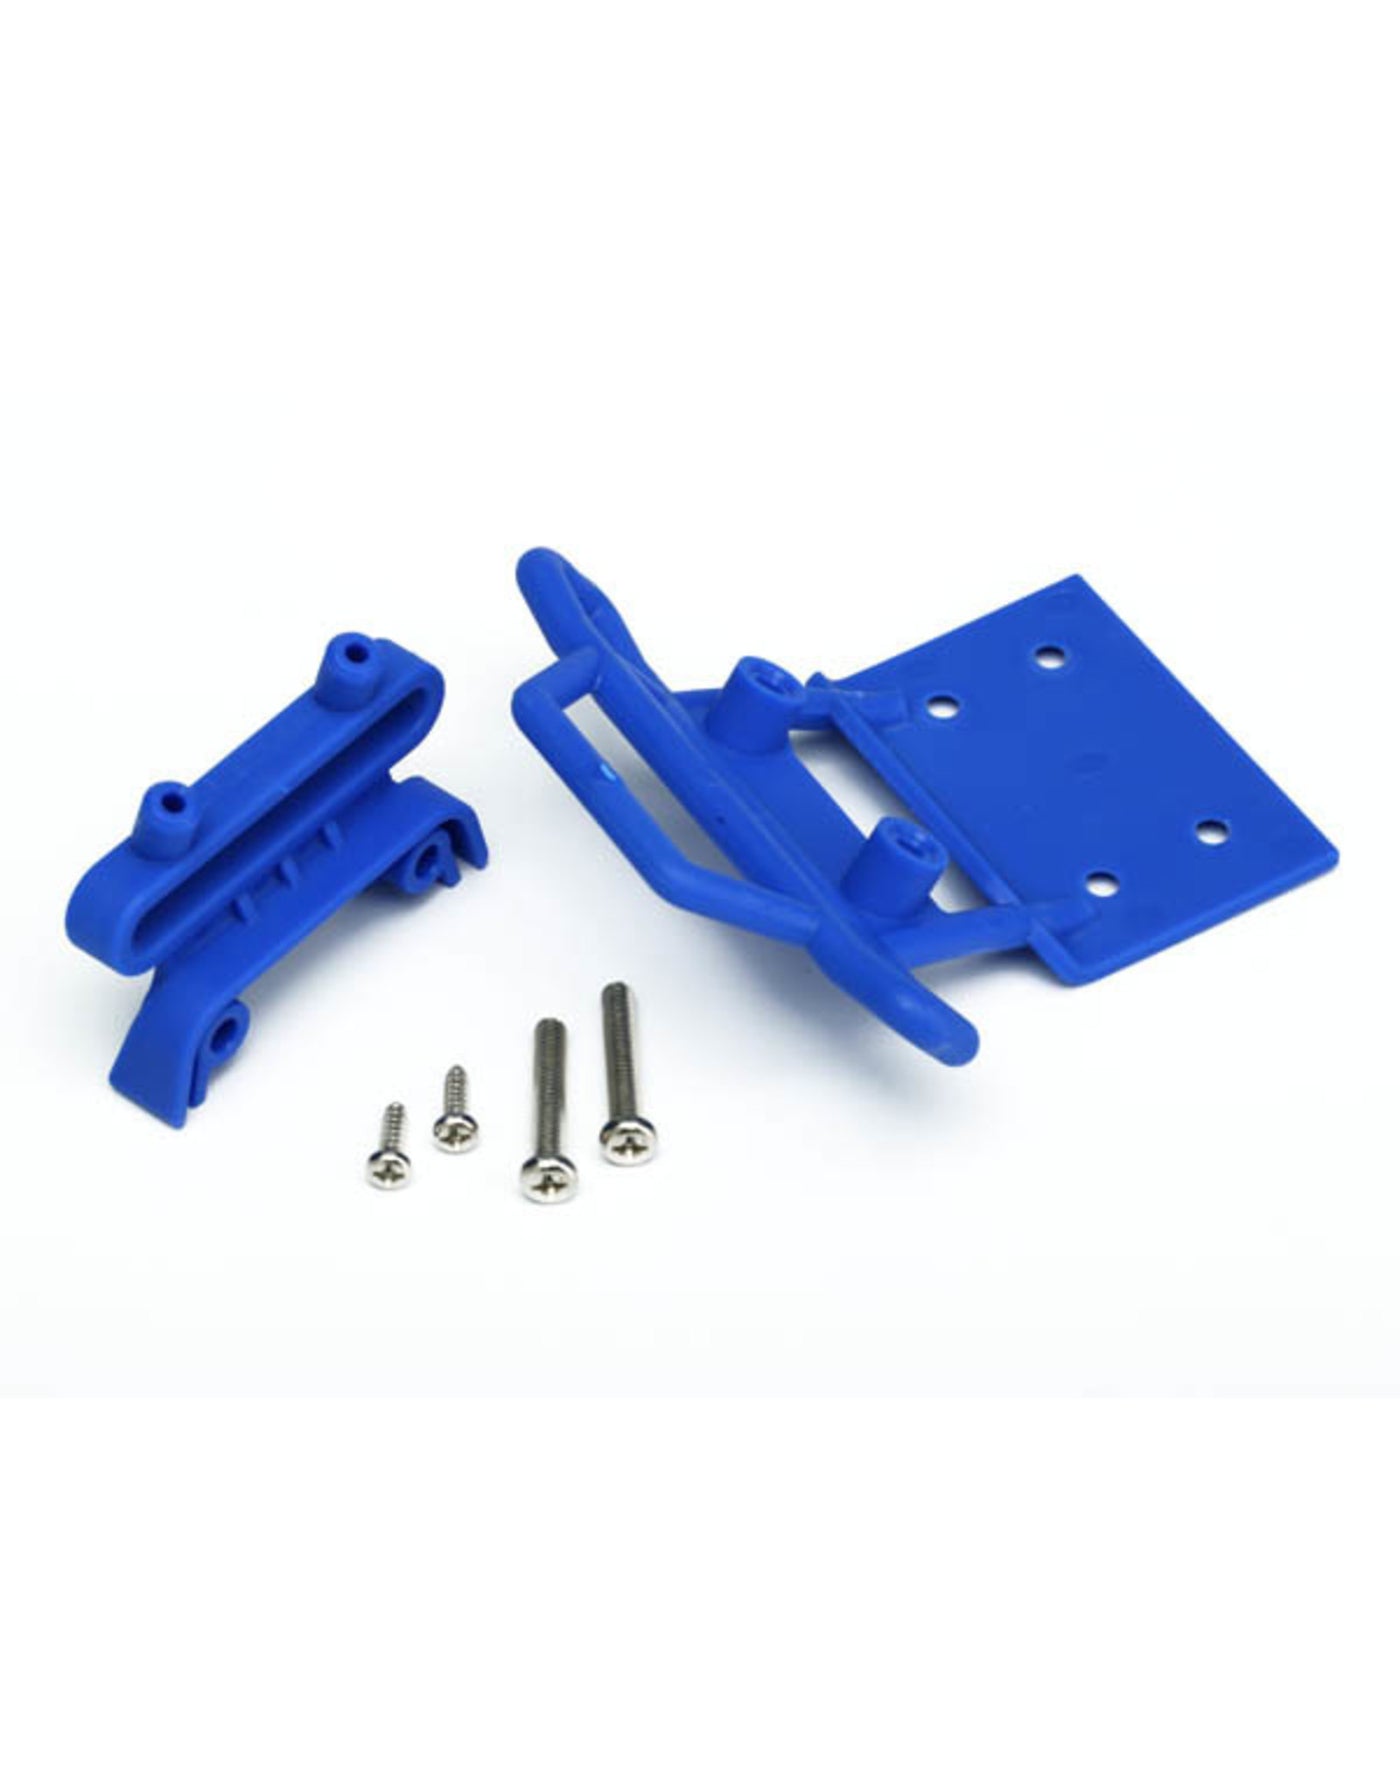 TRA 3621x Front Bumper and Mount, Blue: S